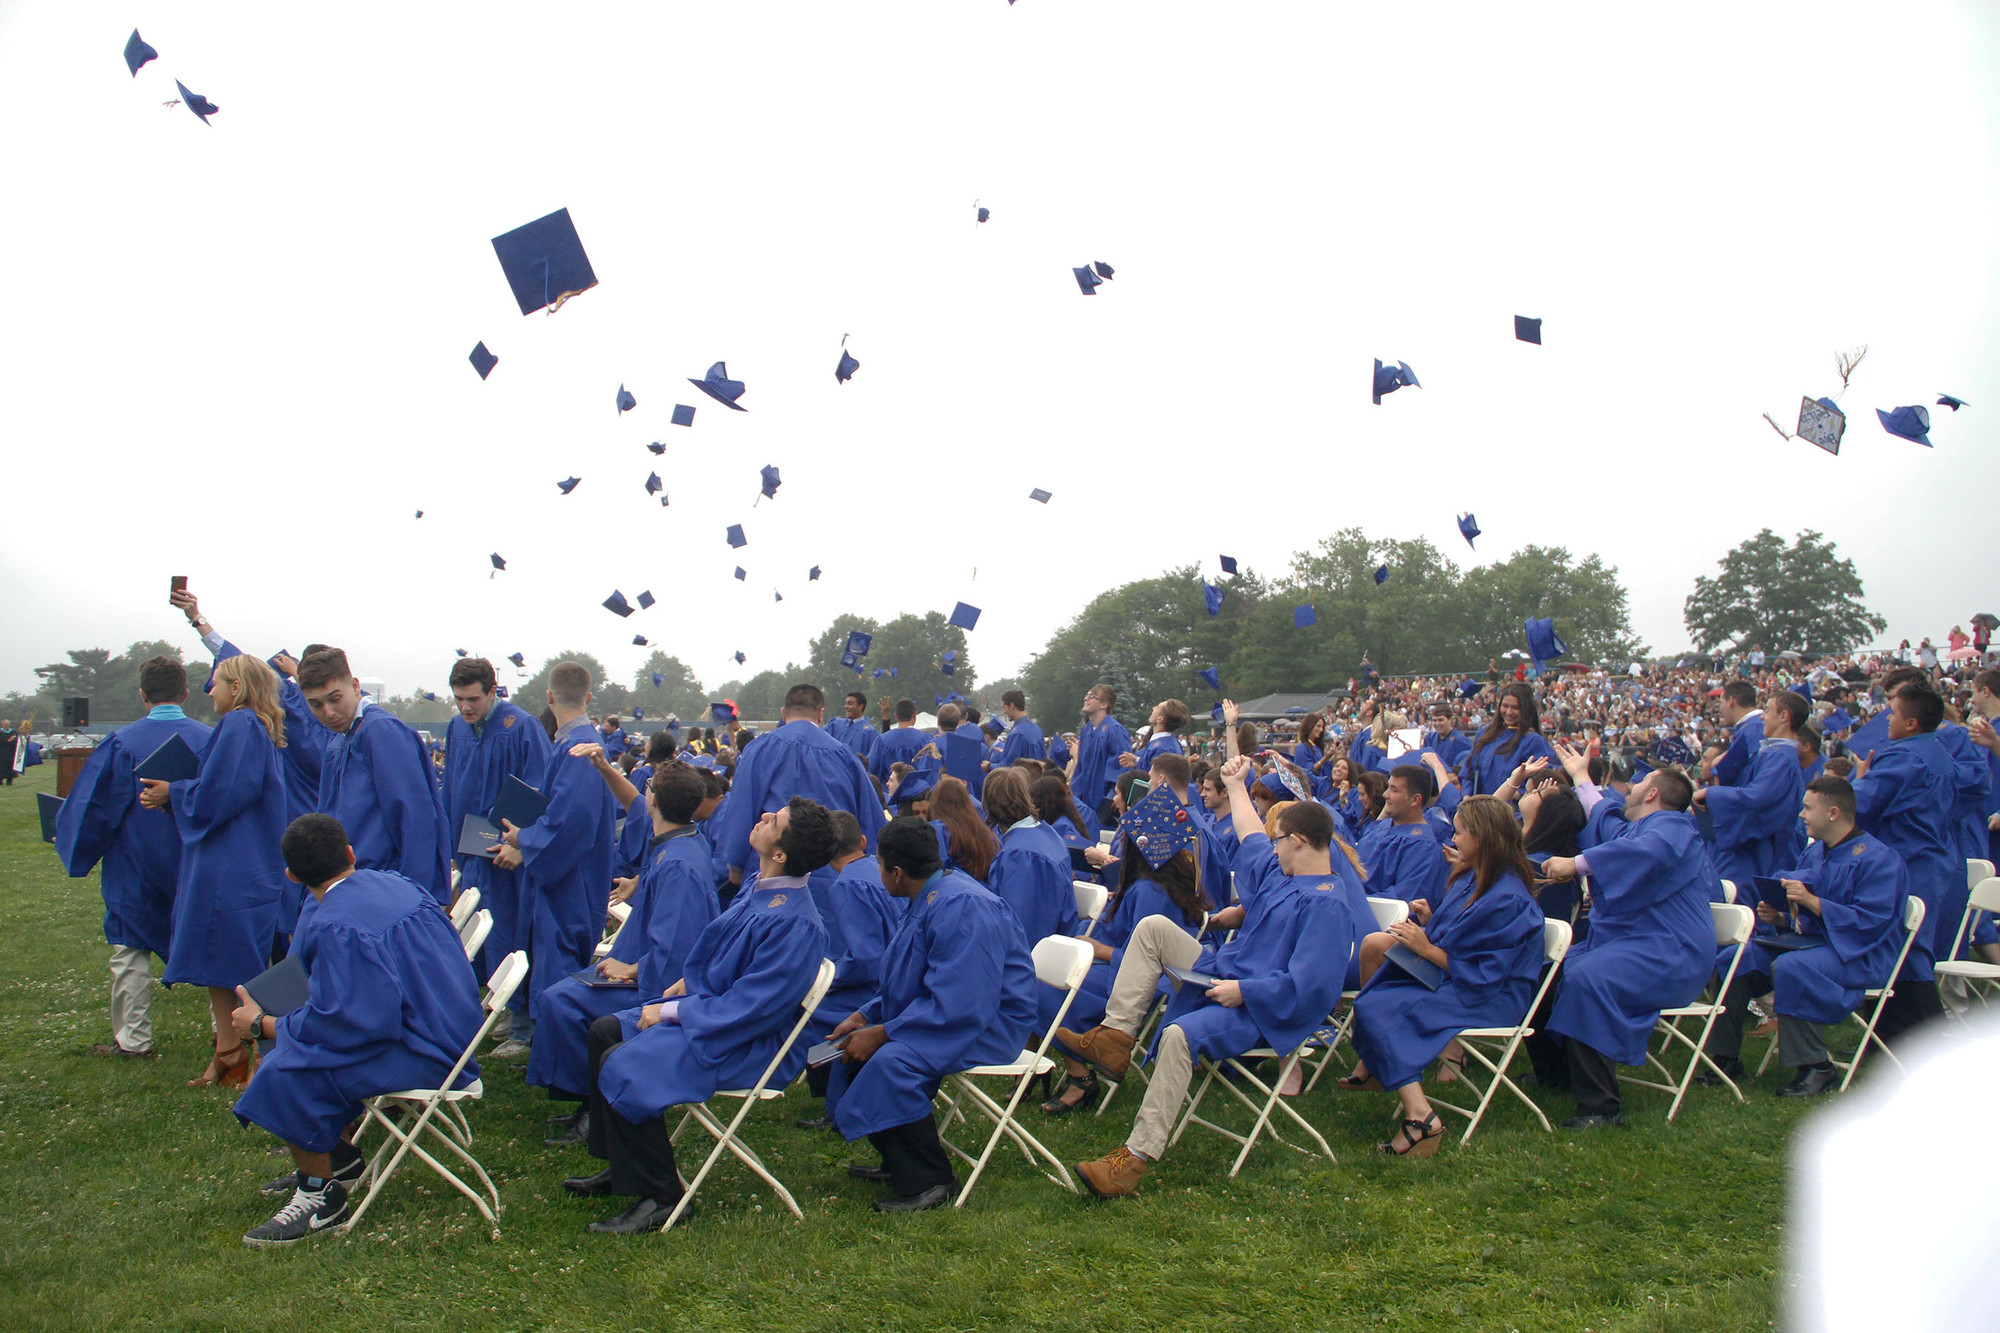 The tossing of the mortarboards marked the end of Sunday’s ceremony on the East Meadow High School football field.